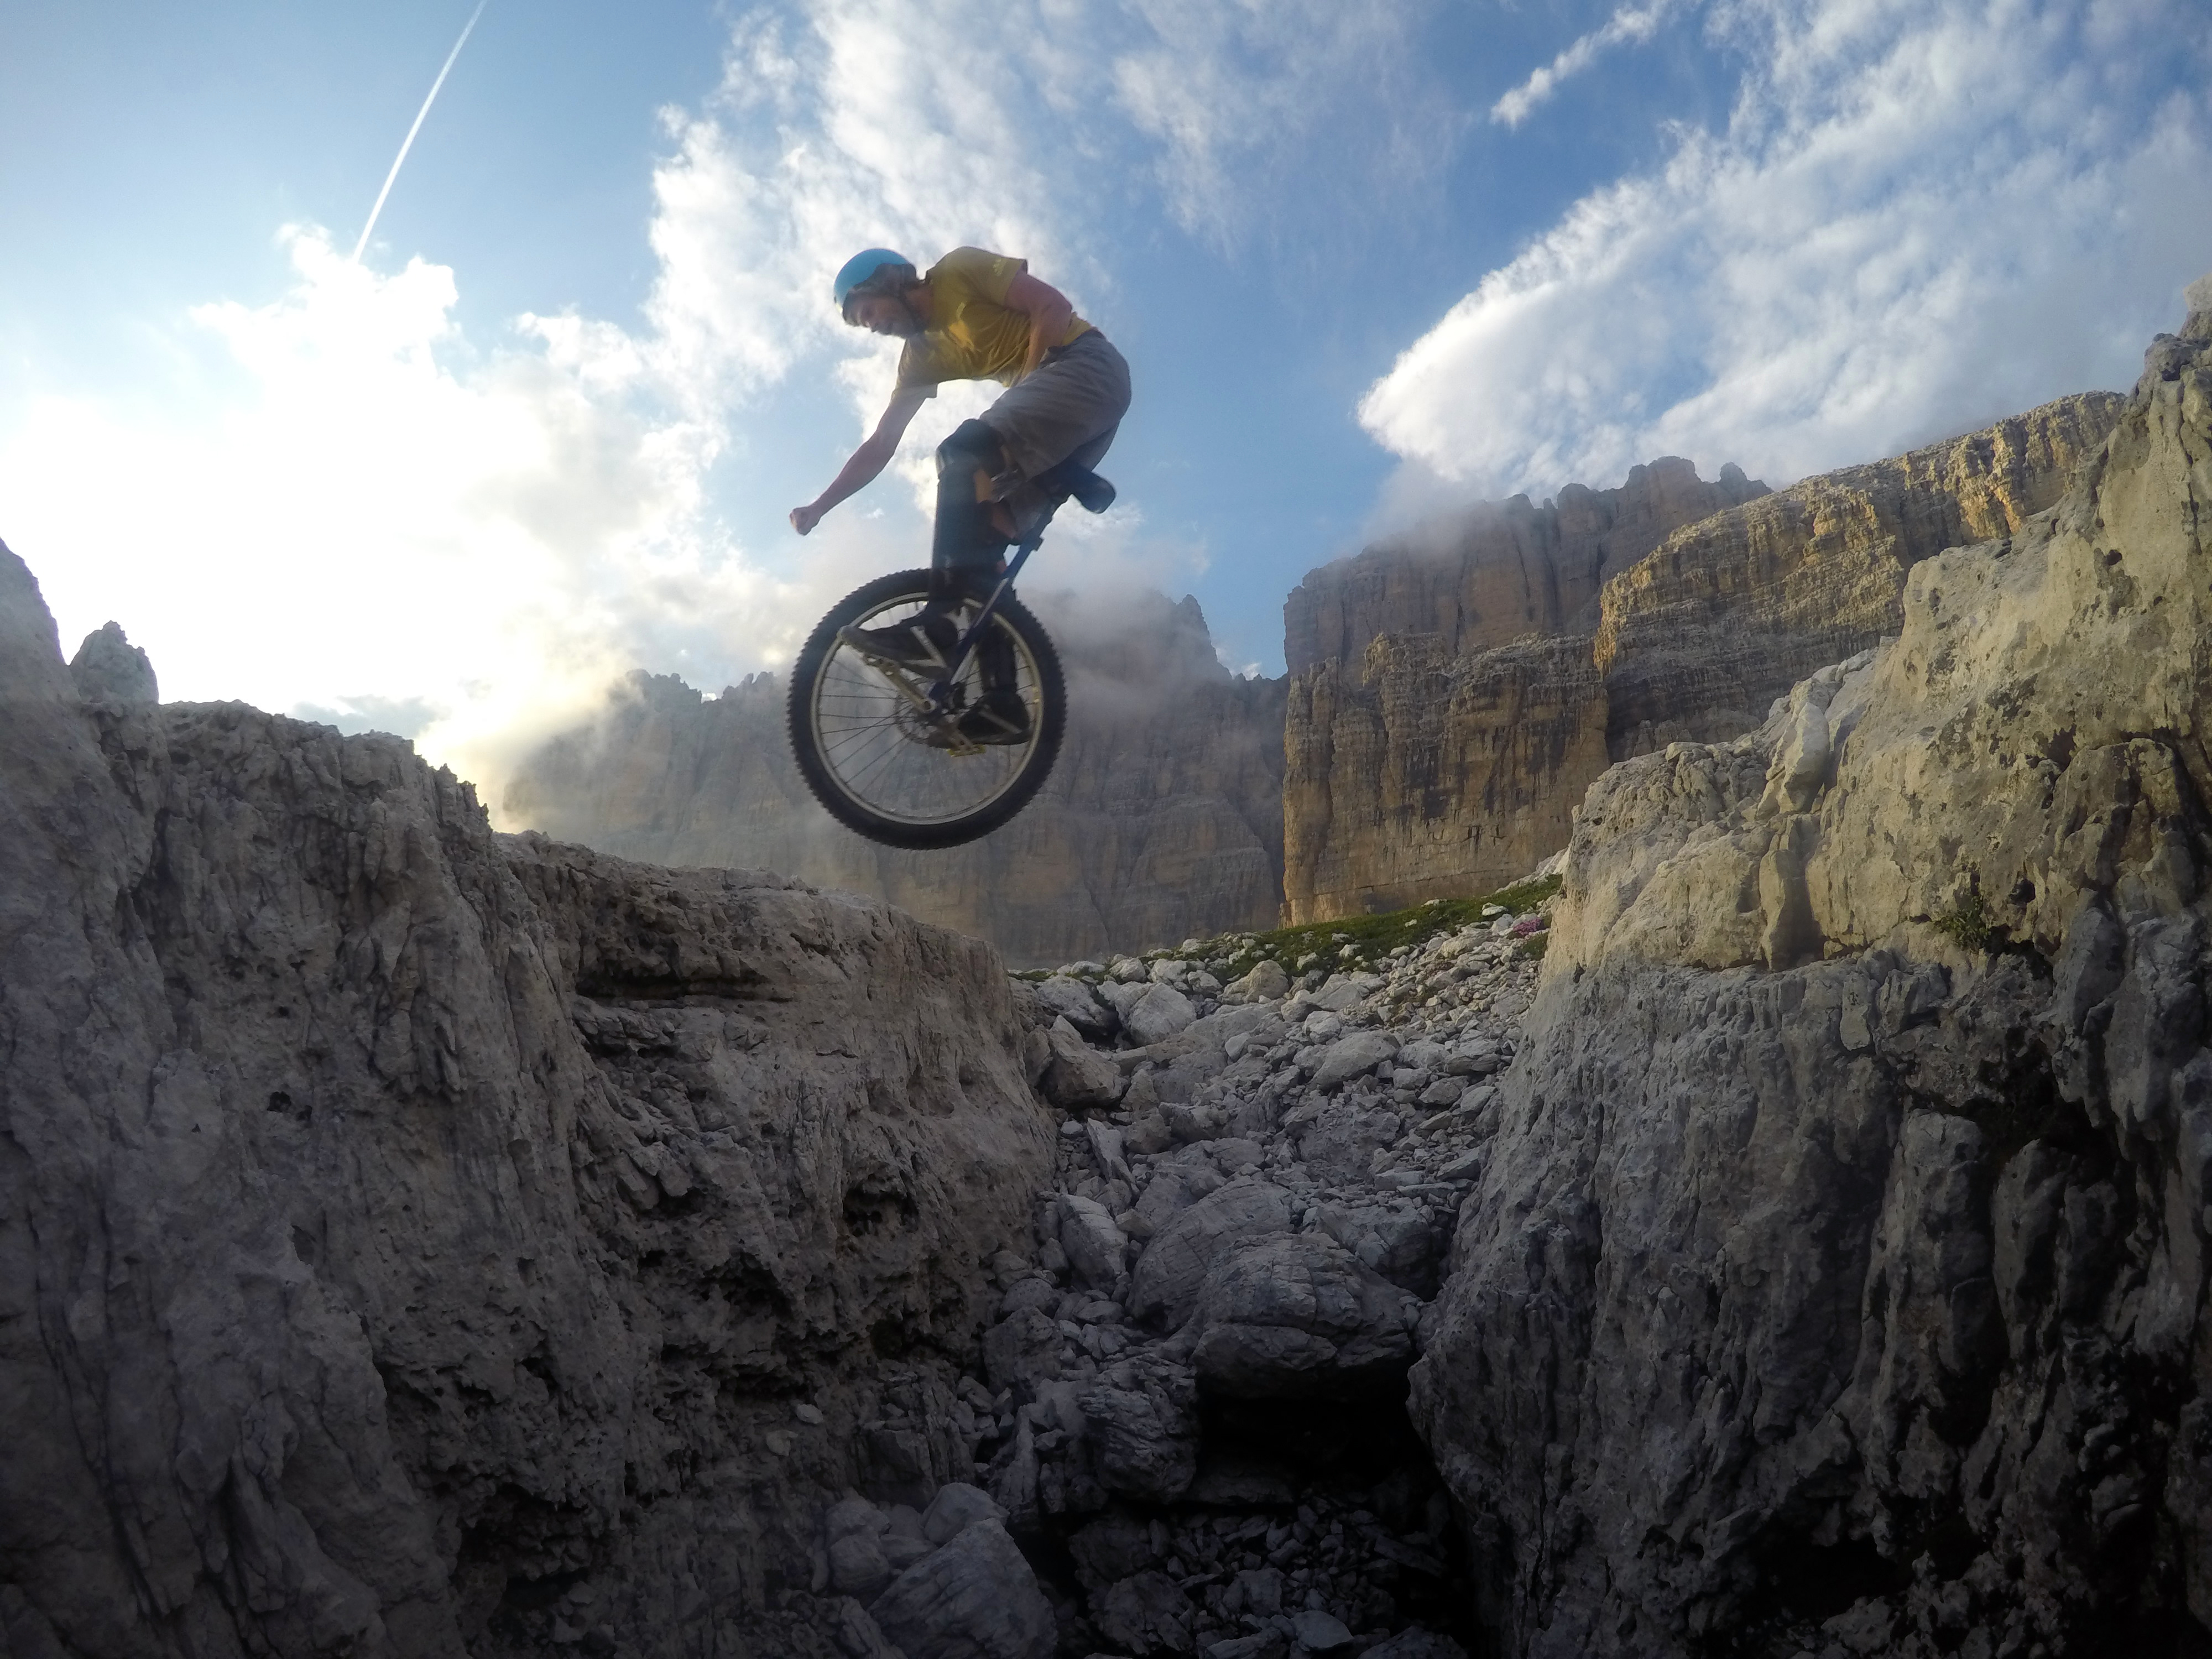 Lutz Eichholz jumping a huge gap in the Dolomites, Italy